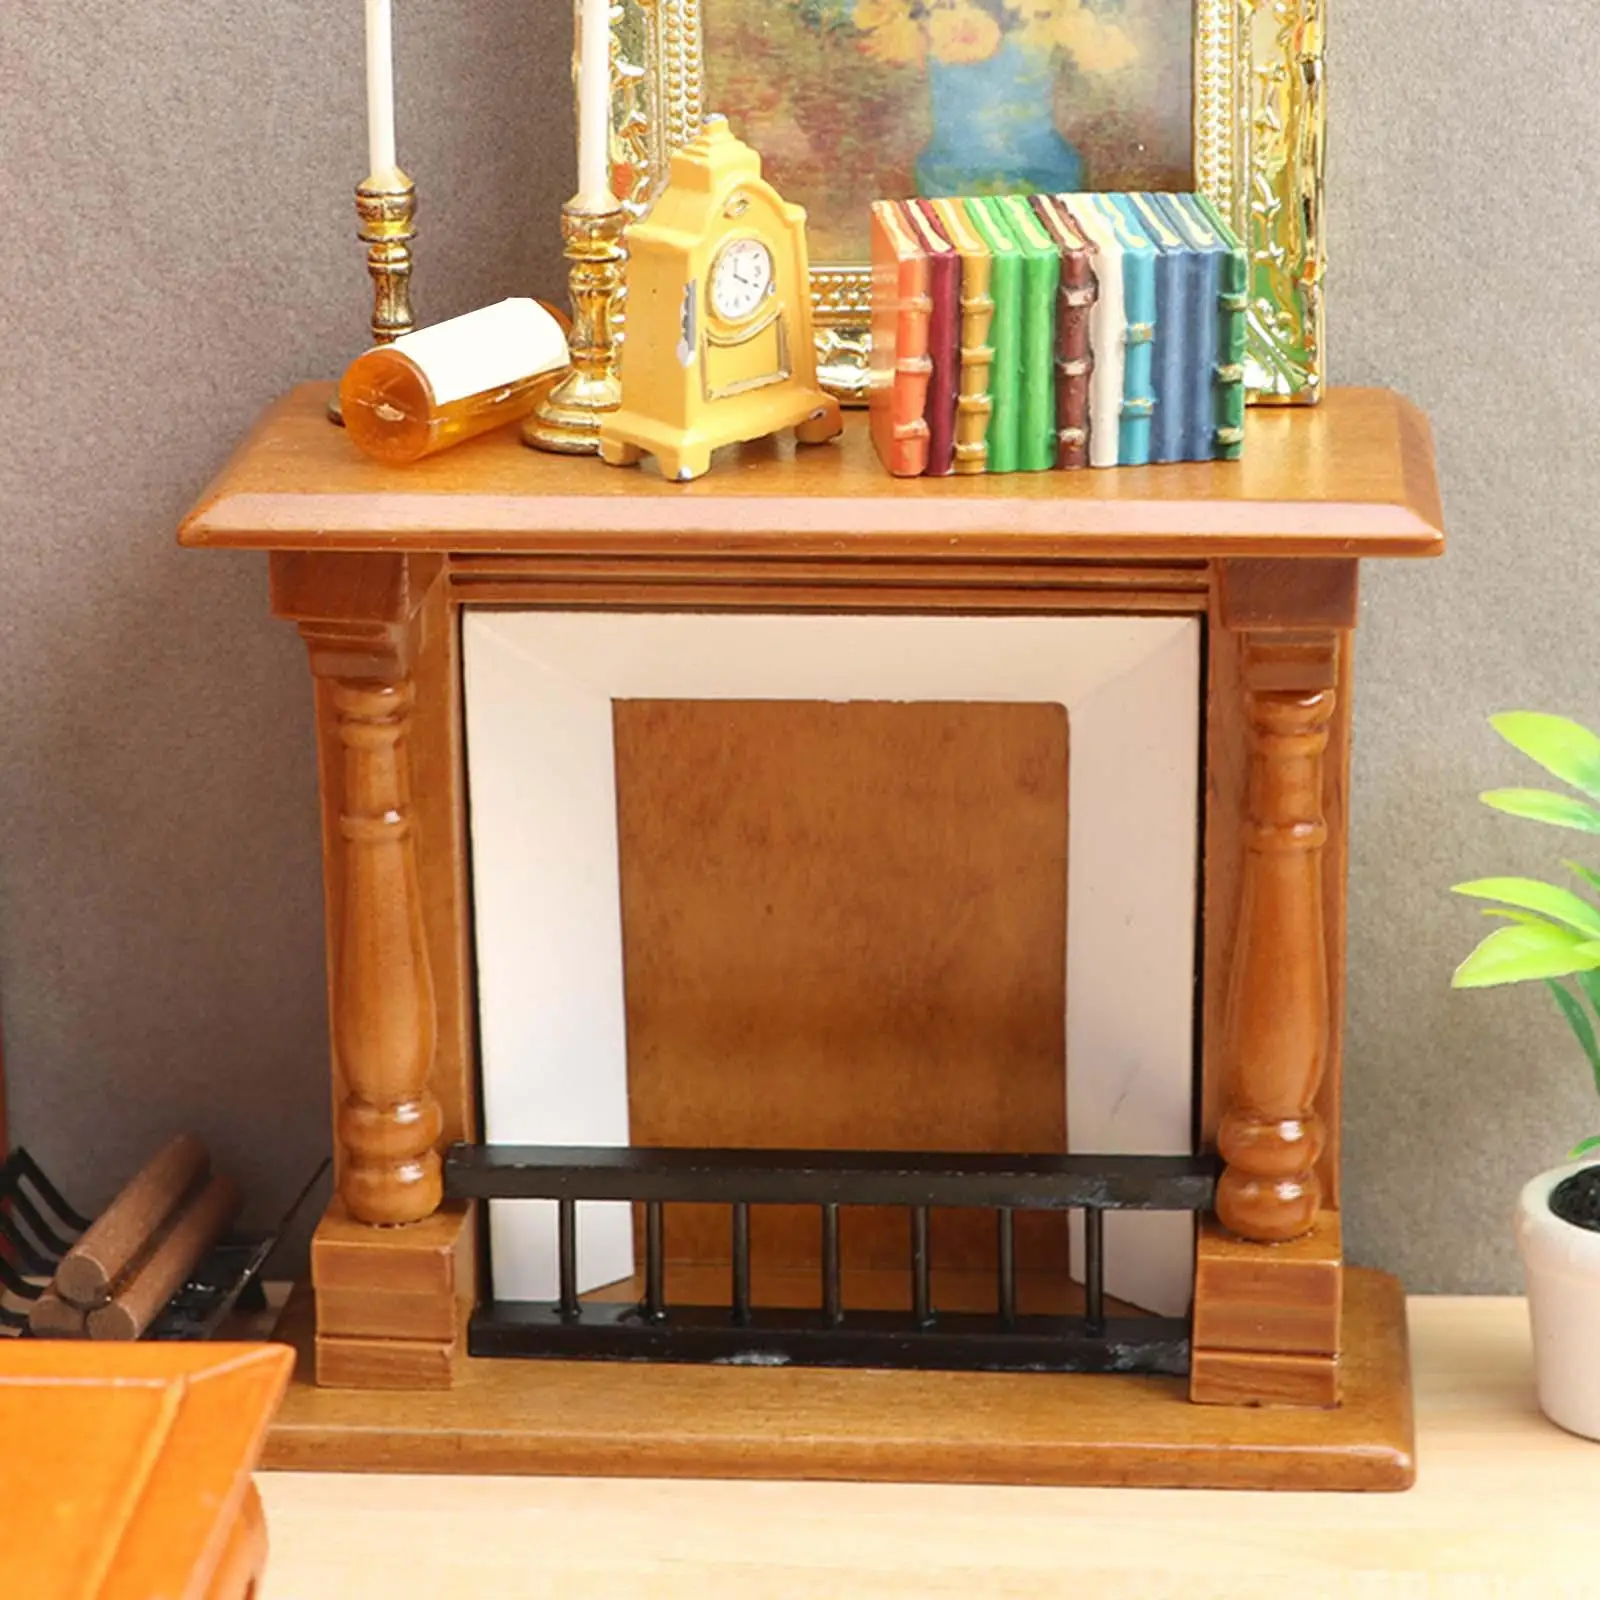 Mini Dollhouse Furniture Decor Wooden TV Stand 1:12 Scale Fireplace for Dollhouses Living Room Life Scene Props DIY Fitments